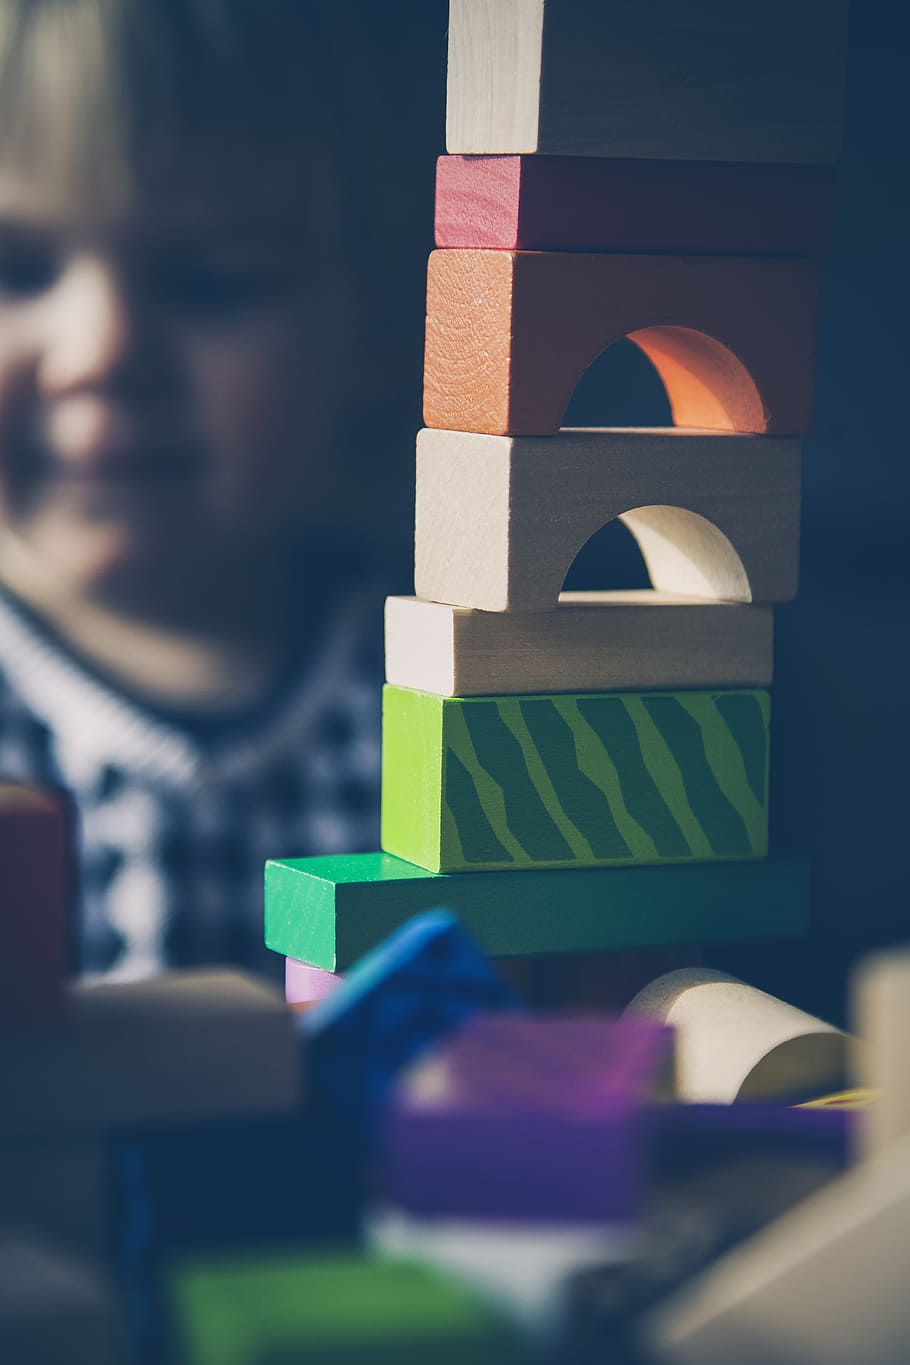 kid, child, girl, baby, blur, playing, toy, multi colored, selective focus, toy block